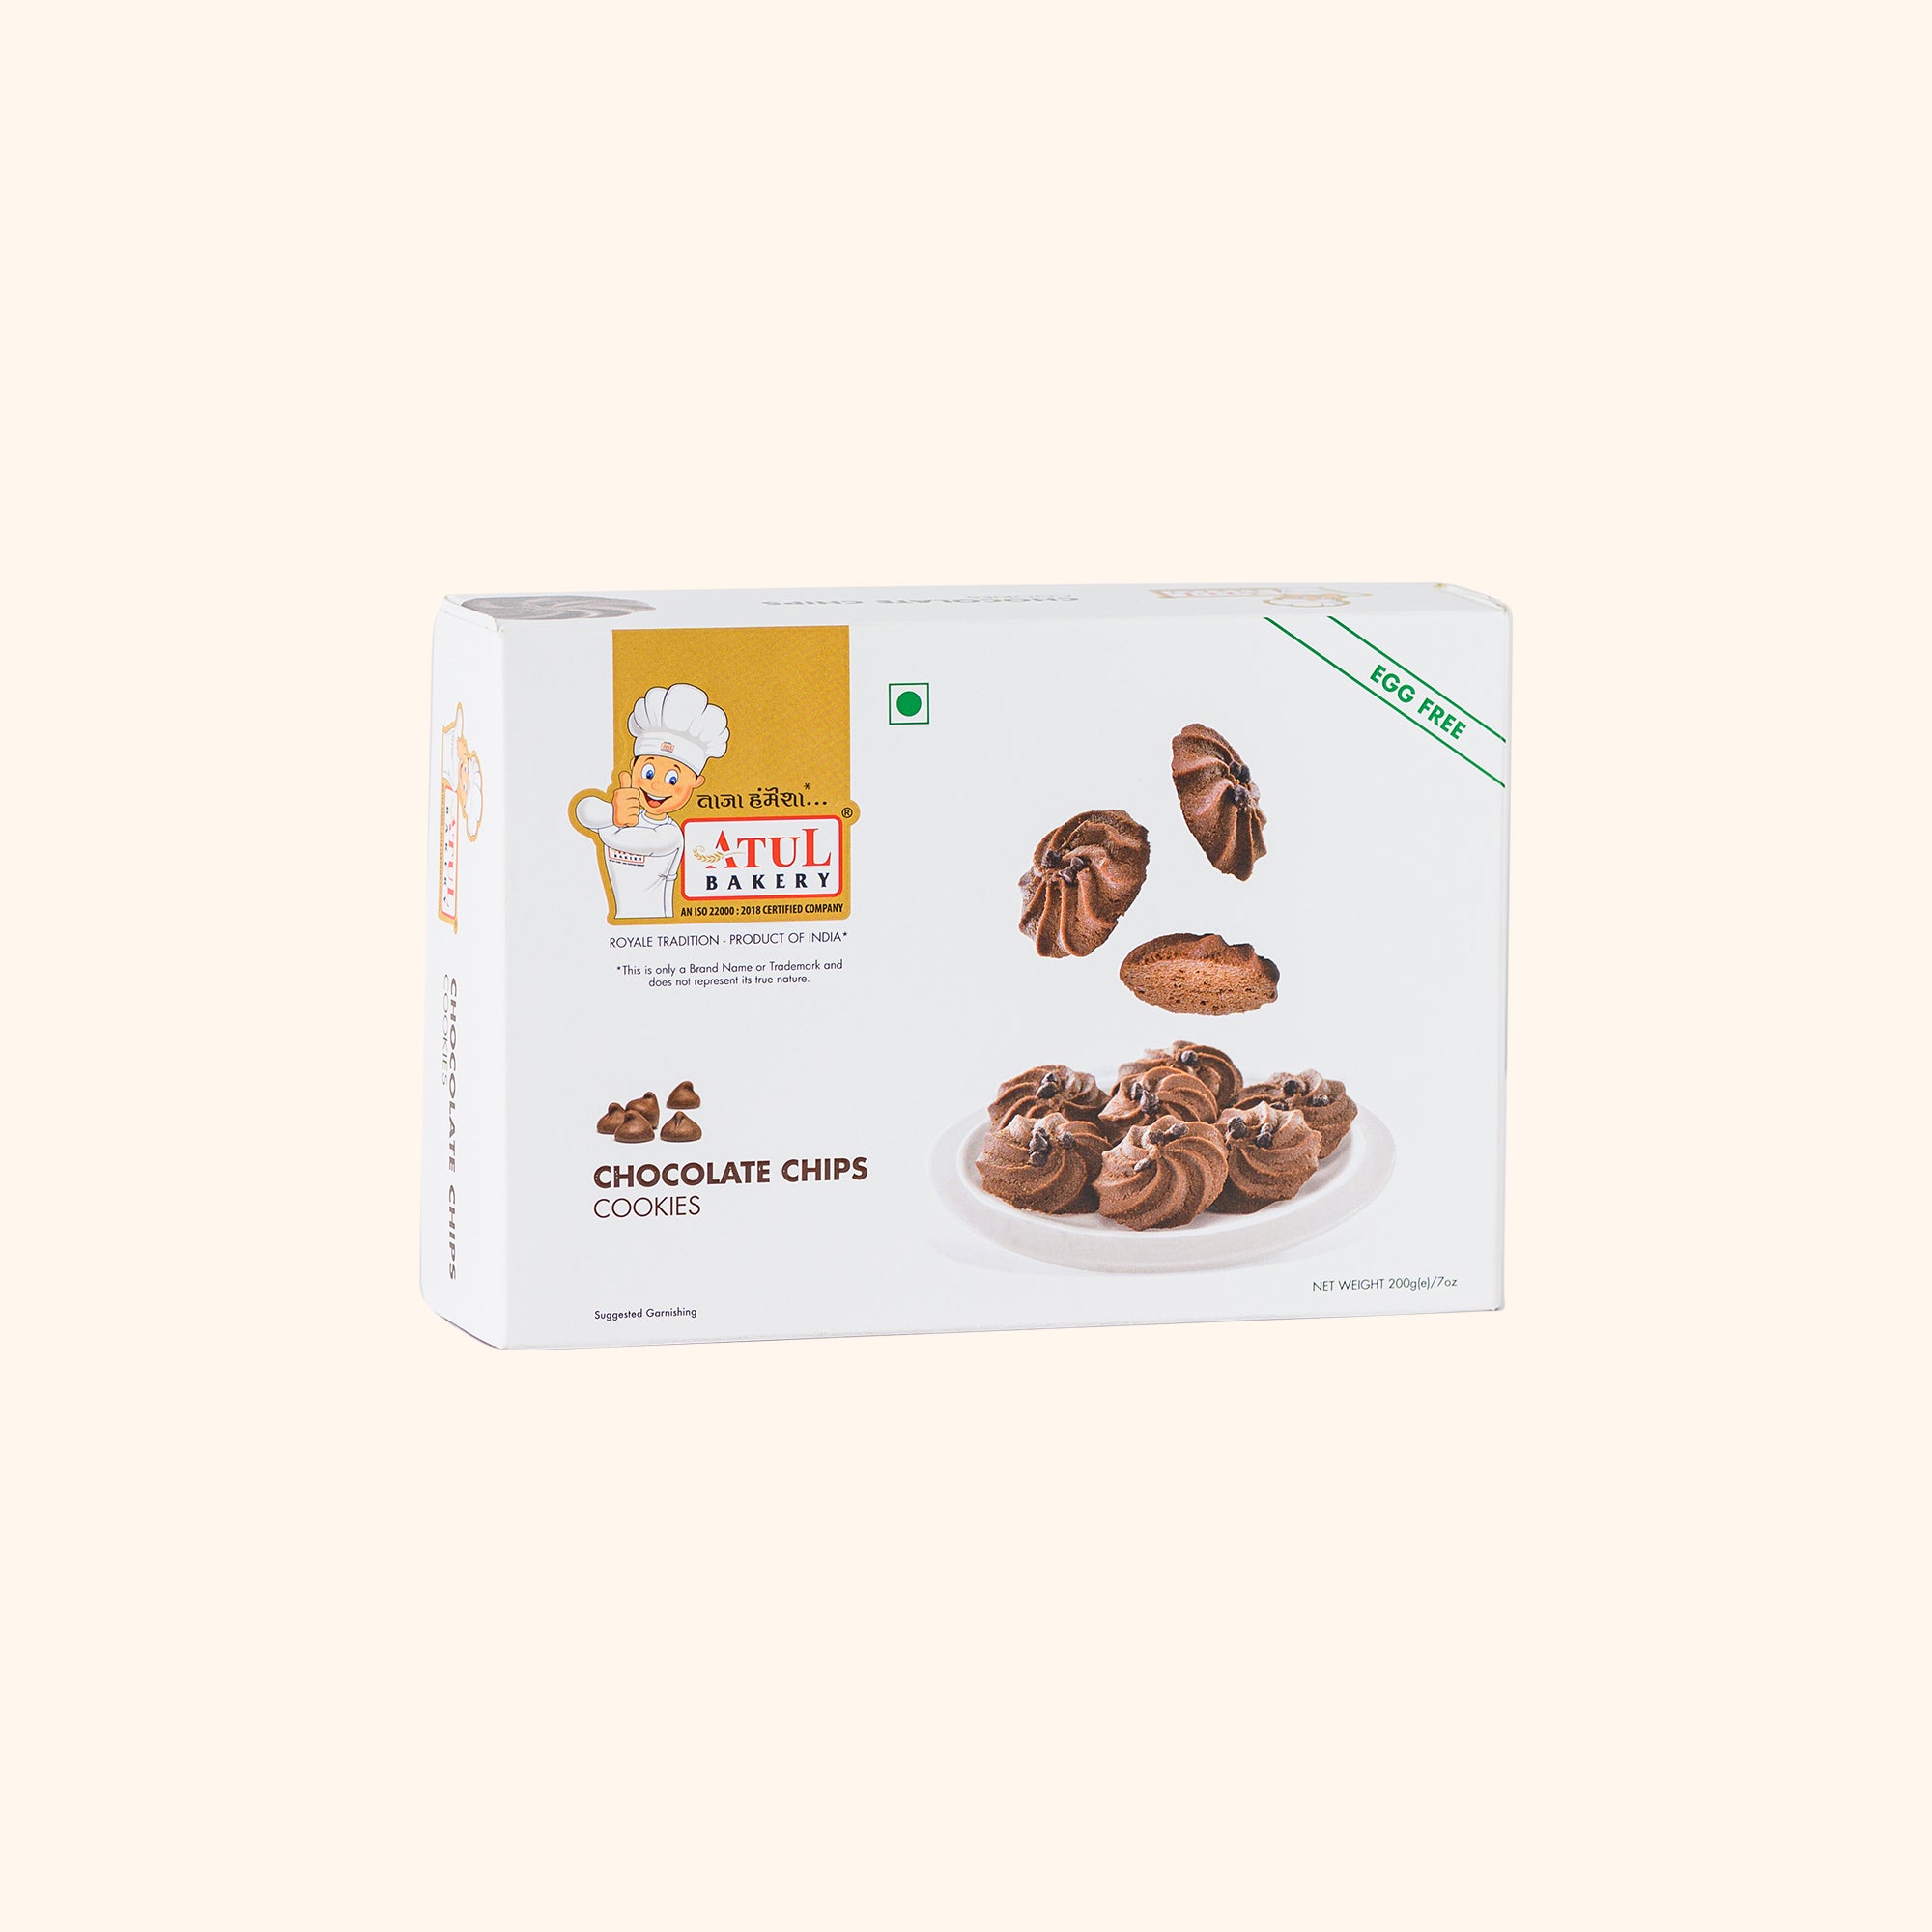 Atul Bakery CHOCOLATE CHIP COOKIES || Healthy and Hygienic || PRODUCT OF INDIA